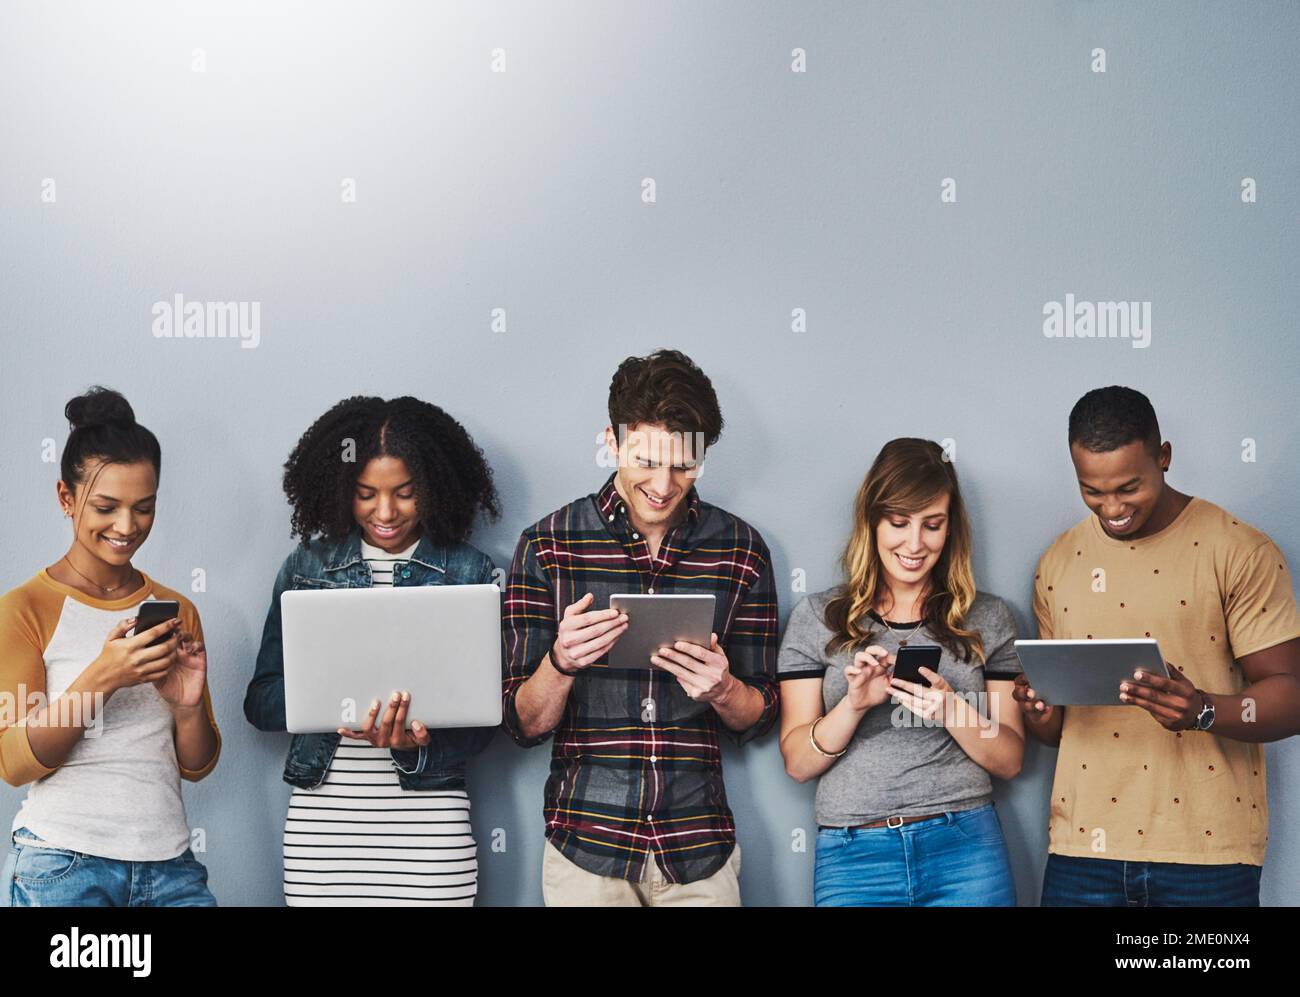 Teched out youth of today. Studio shot of a group of young people using wireless technology against a gray background. Stock Photo